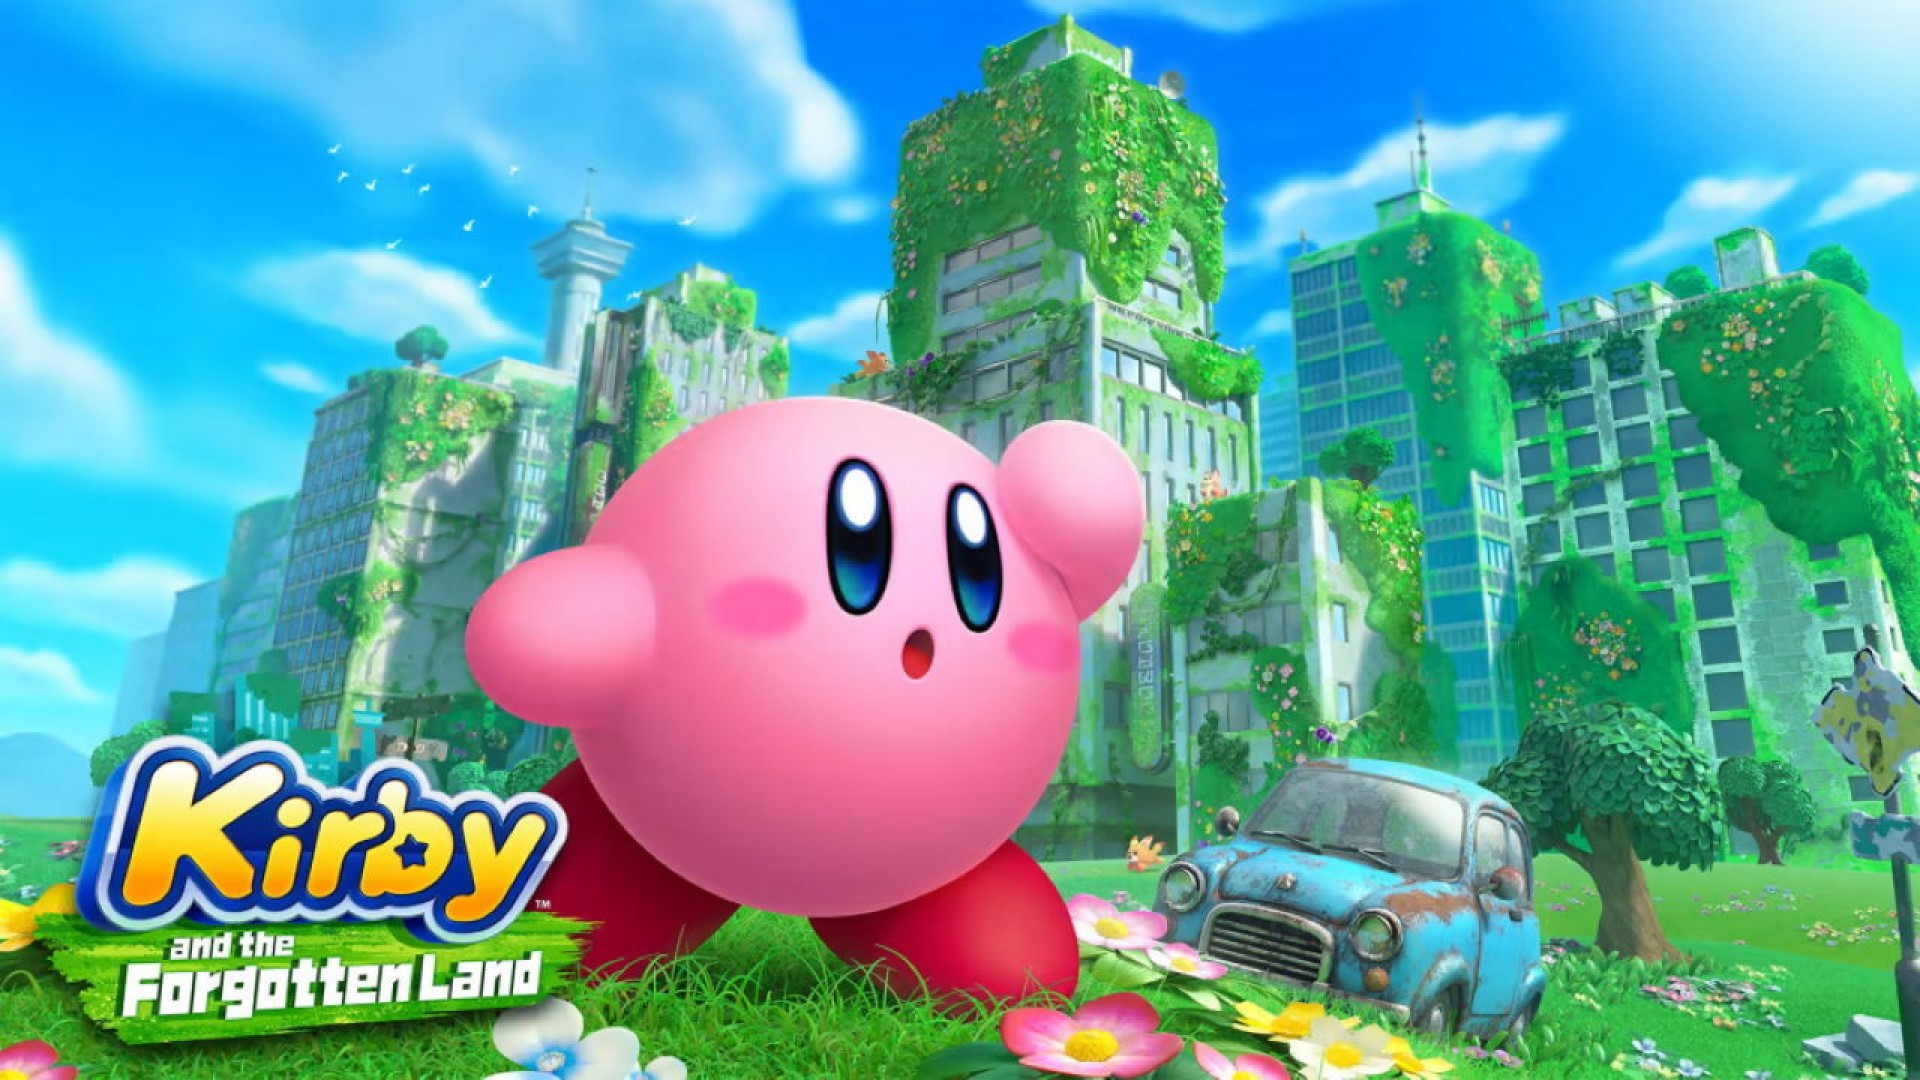 Kirby and the Forgotten Land Sells 5.27 Million Units,
Becoming the Best-Selling Kirby Game to Date